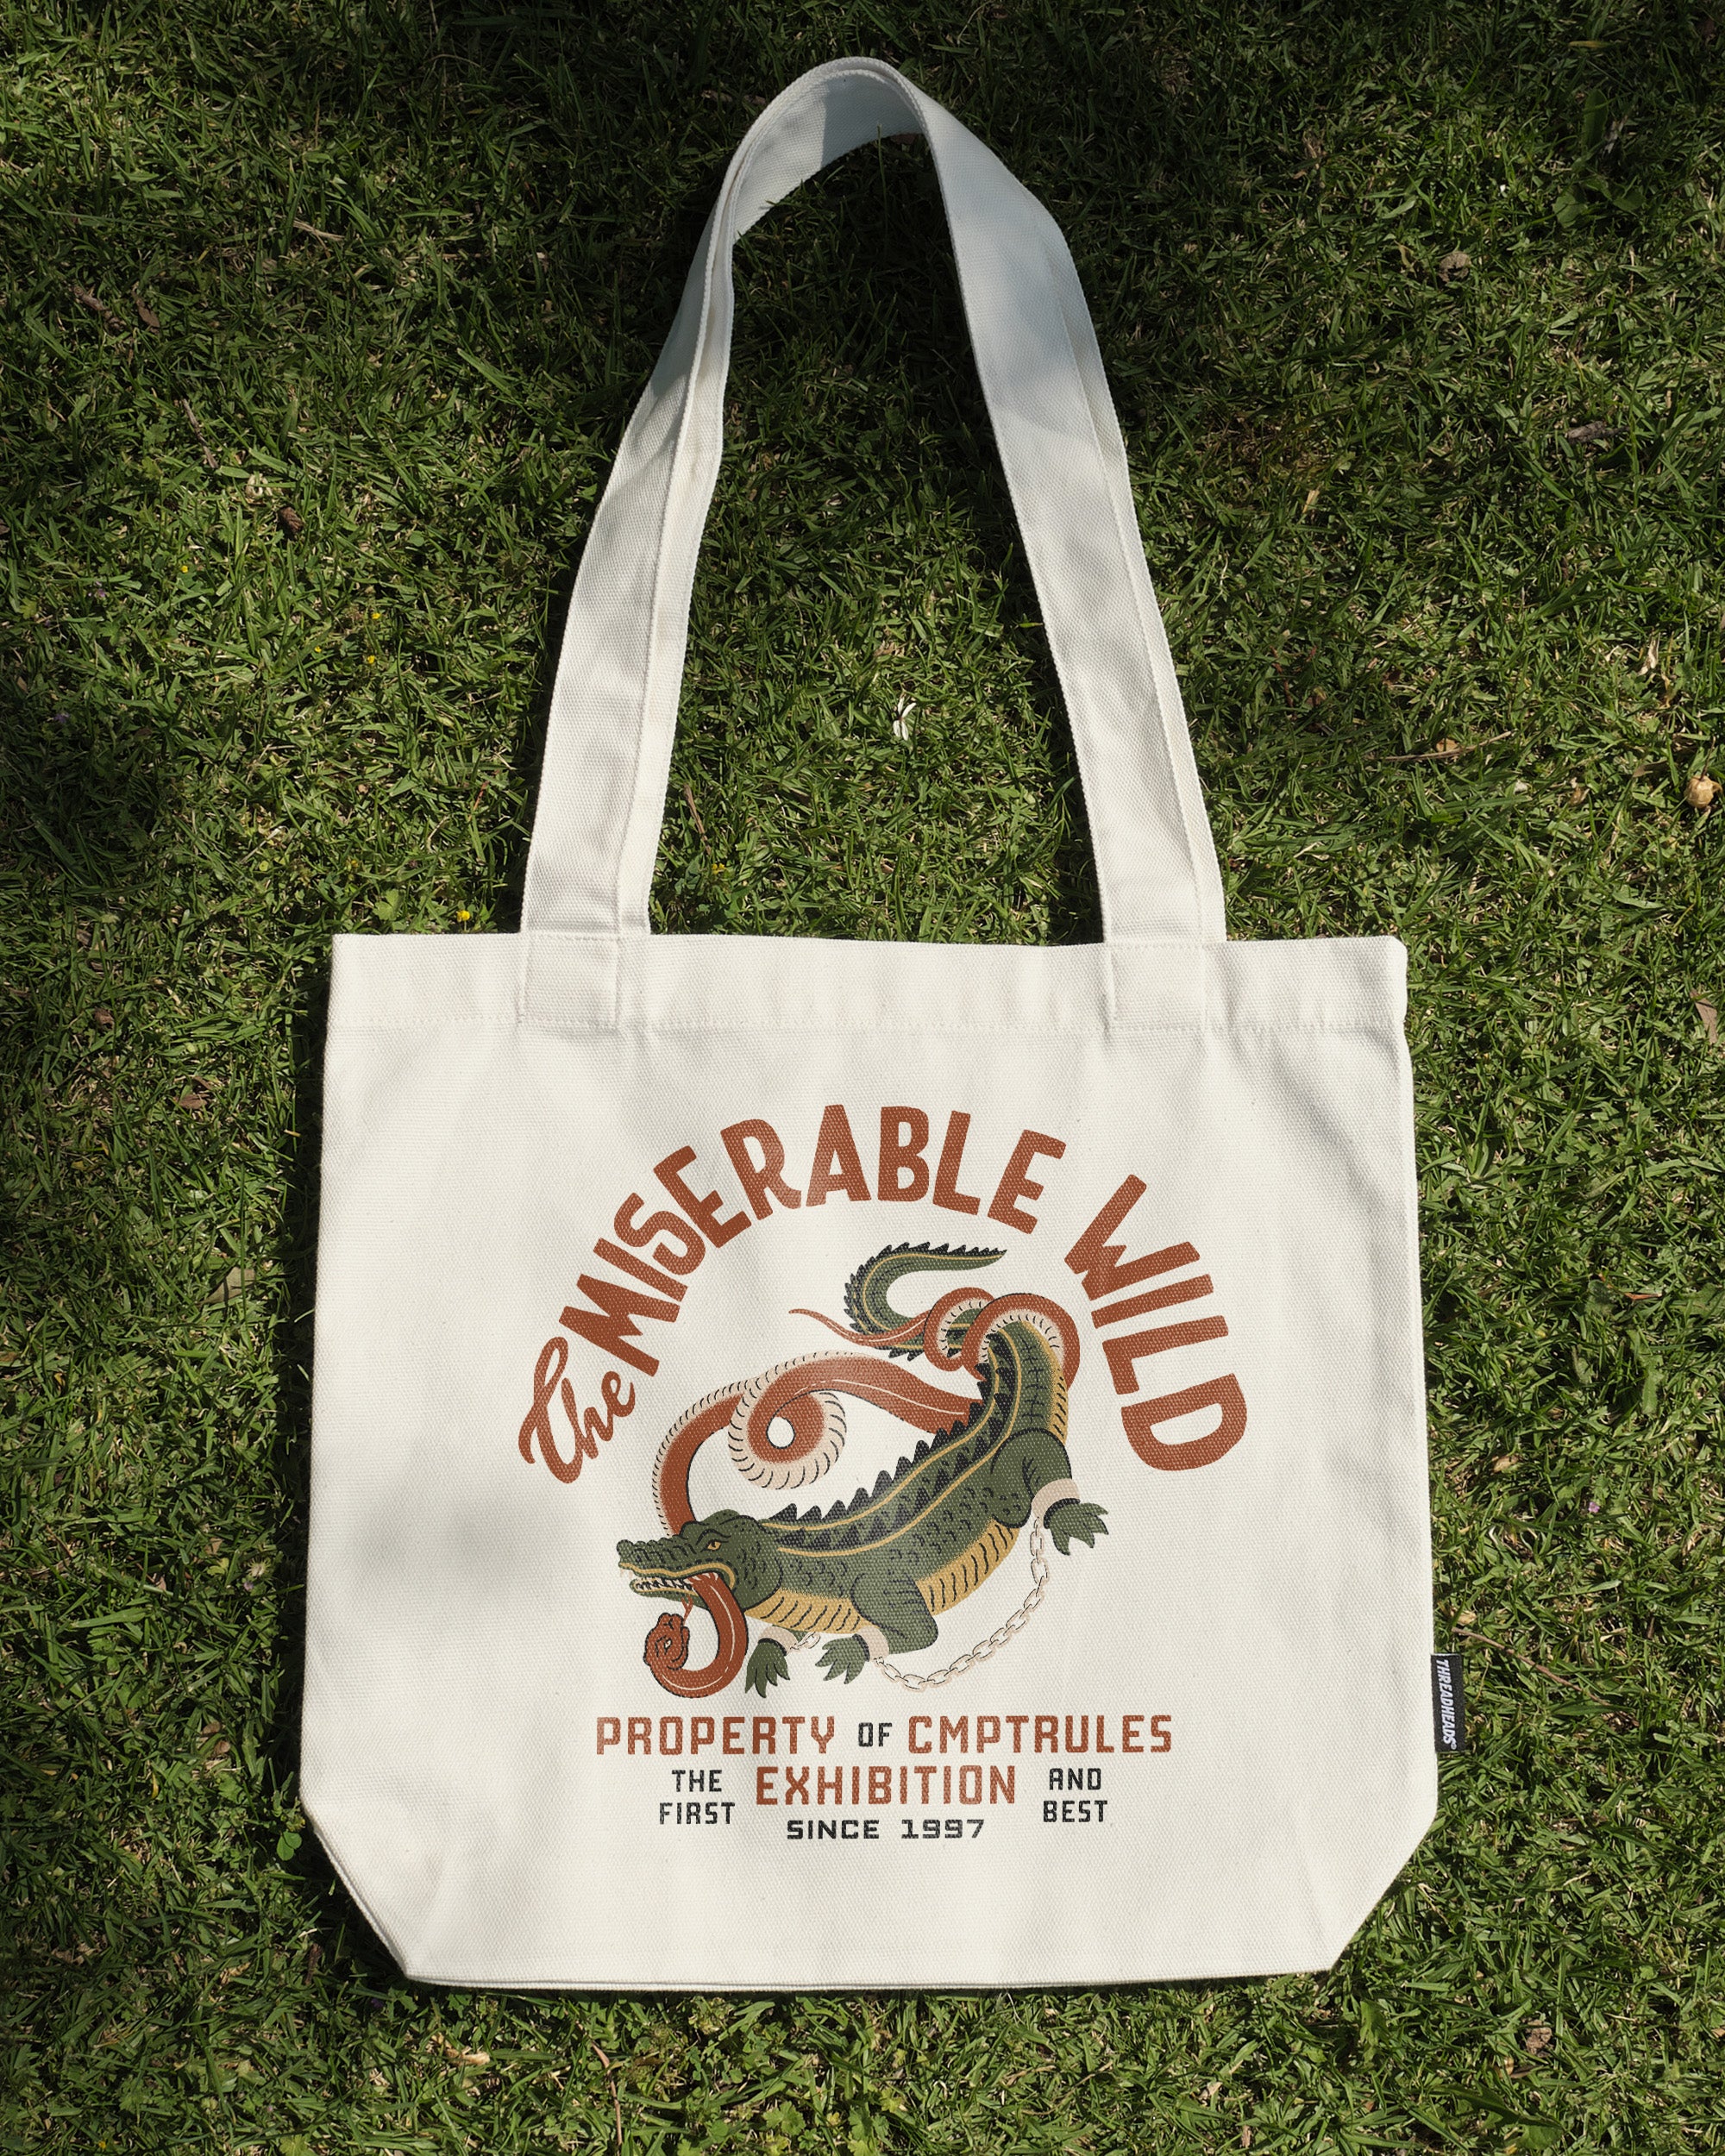 The Miserable Wild Tote Bag